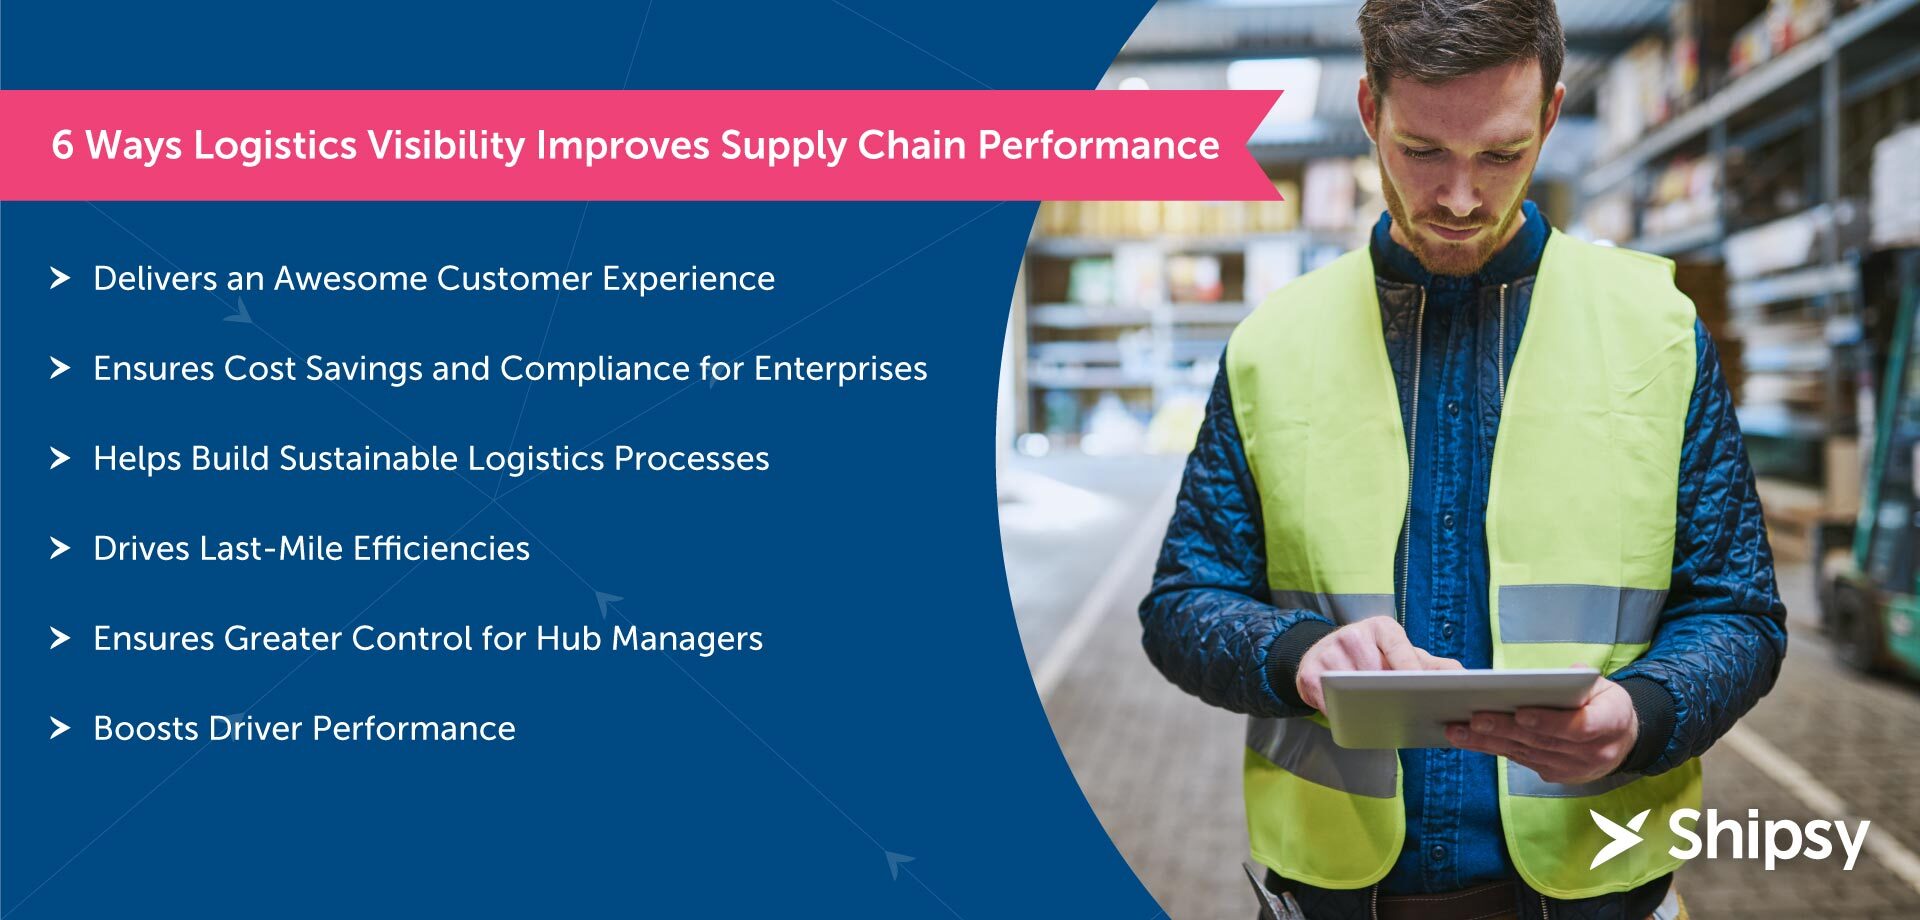 how logistics visibility improves supply chain performance